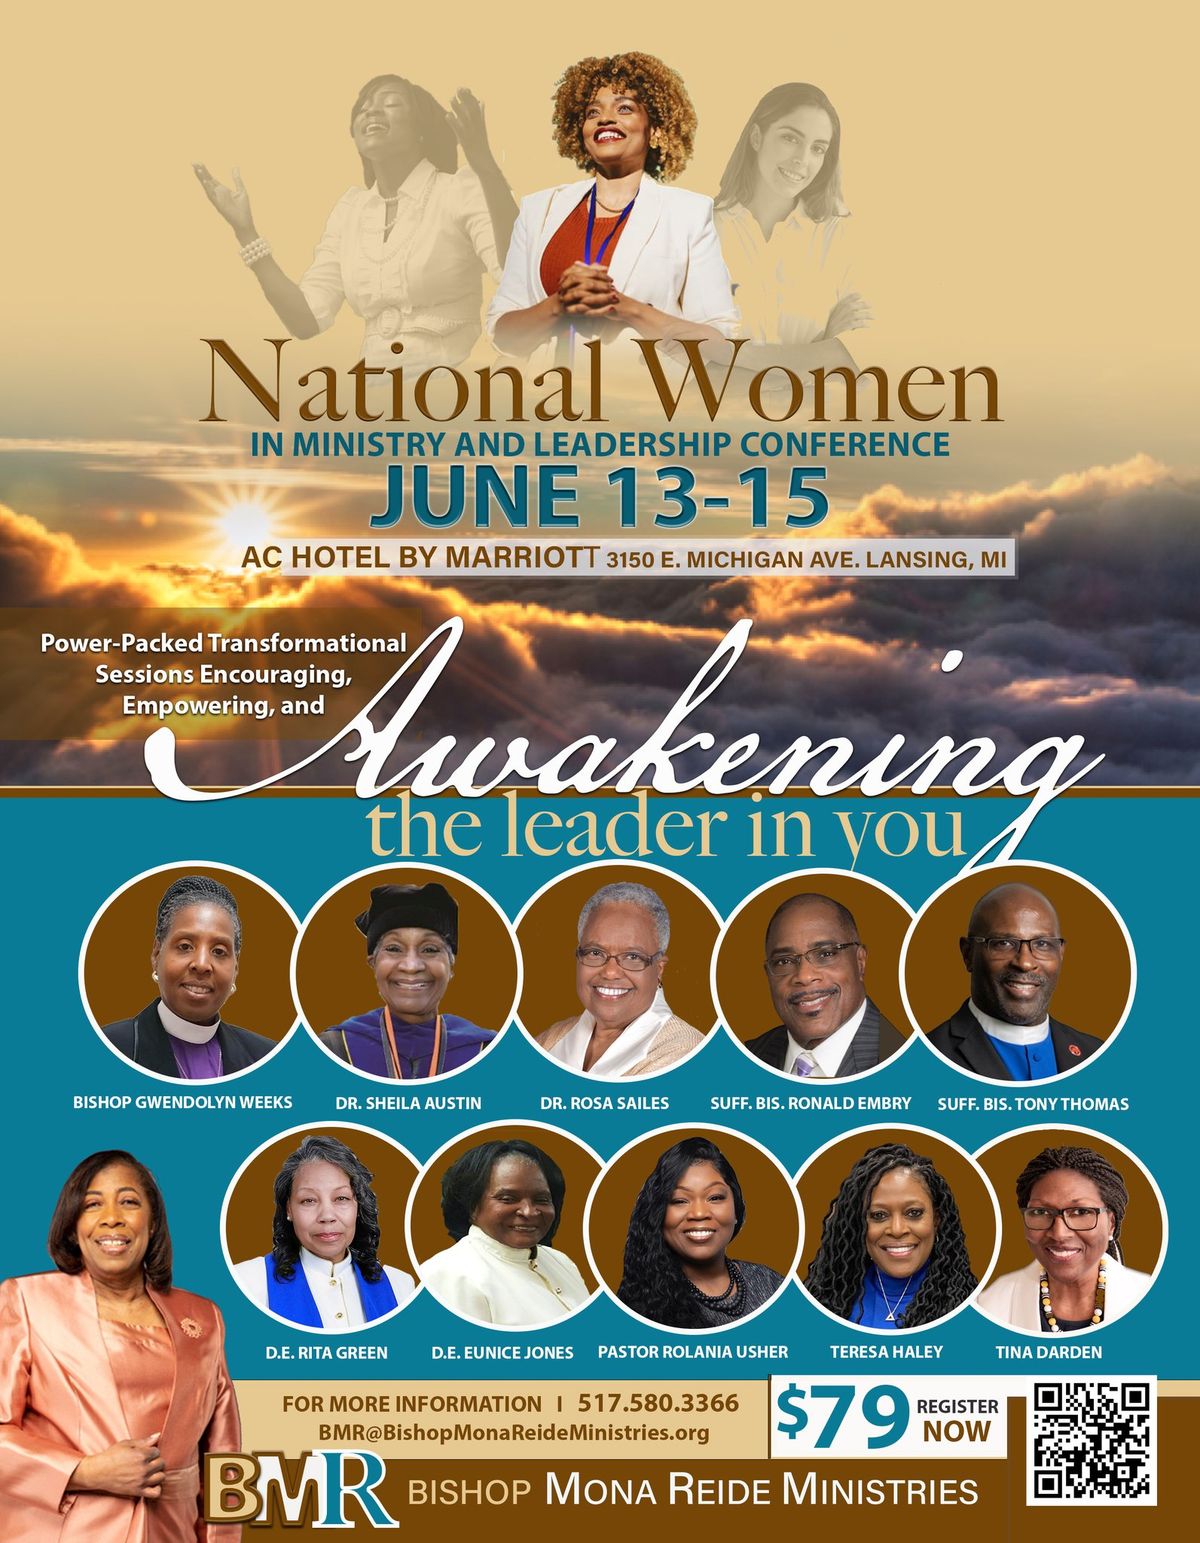 National Women in Ministry and Leadership Conference